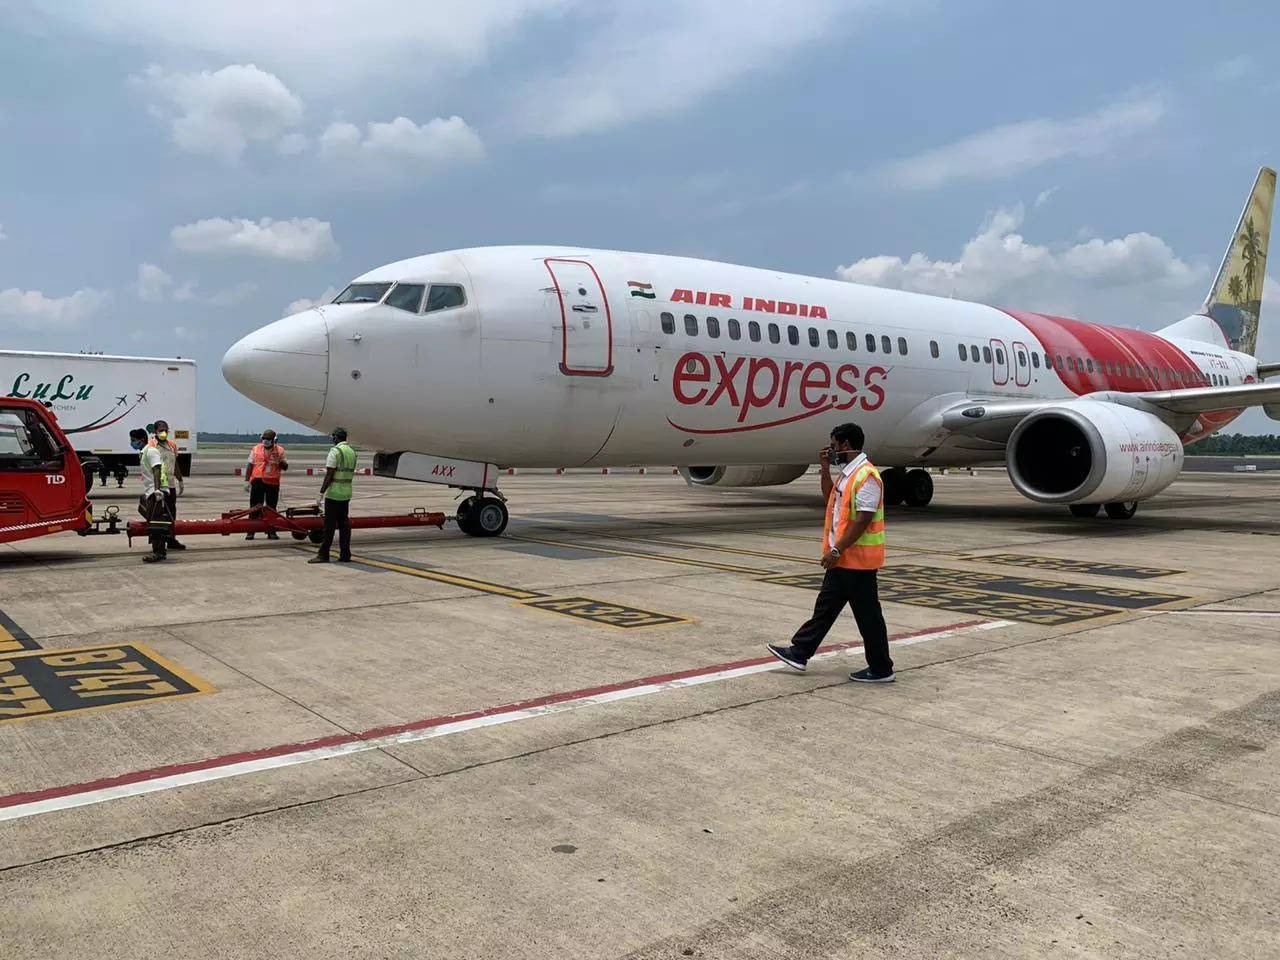 <p>New Delhi, July 27 (IANS) The Directorate General of Civil Aviation (DGCA) on Thursday gave its go ahead to the Tata Group's initiative to merge the budget airline AIX Connect (previously known as AirAsia India) with Air India Express, a senior DGCA official confirmed to IANS.</p>